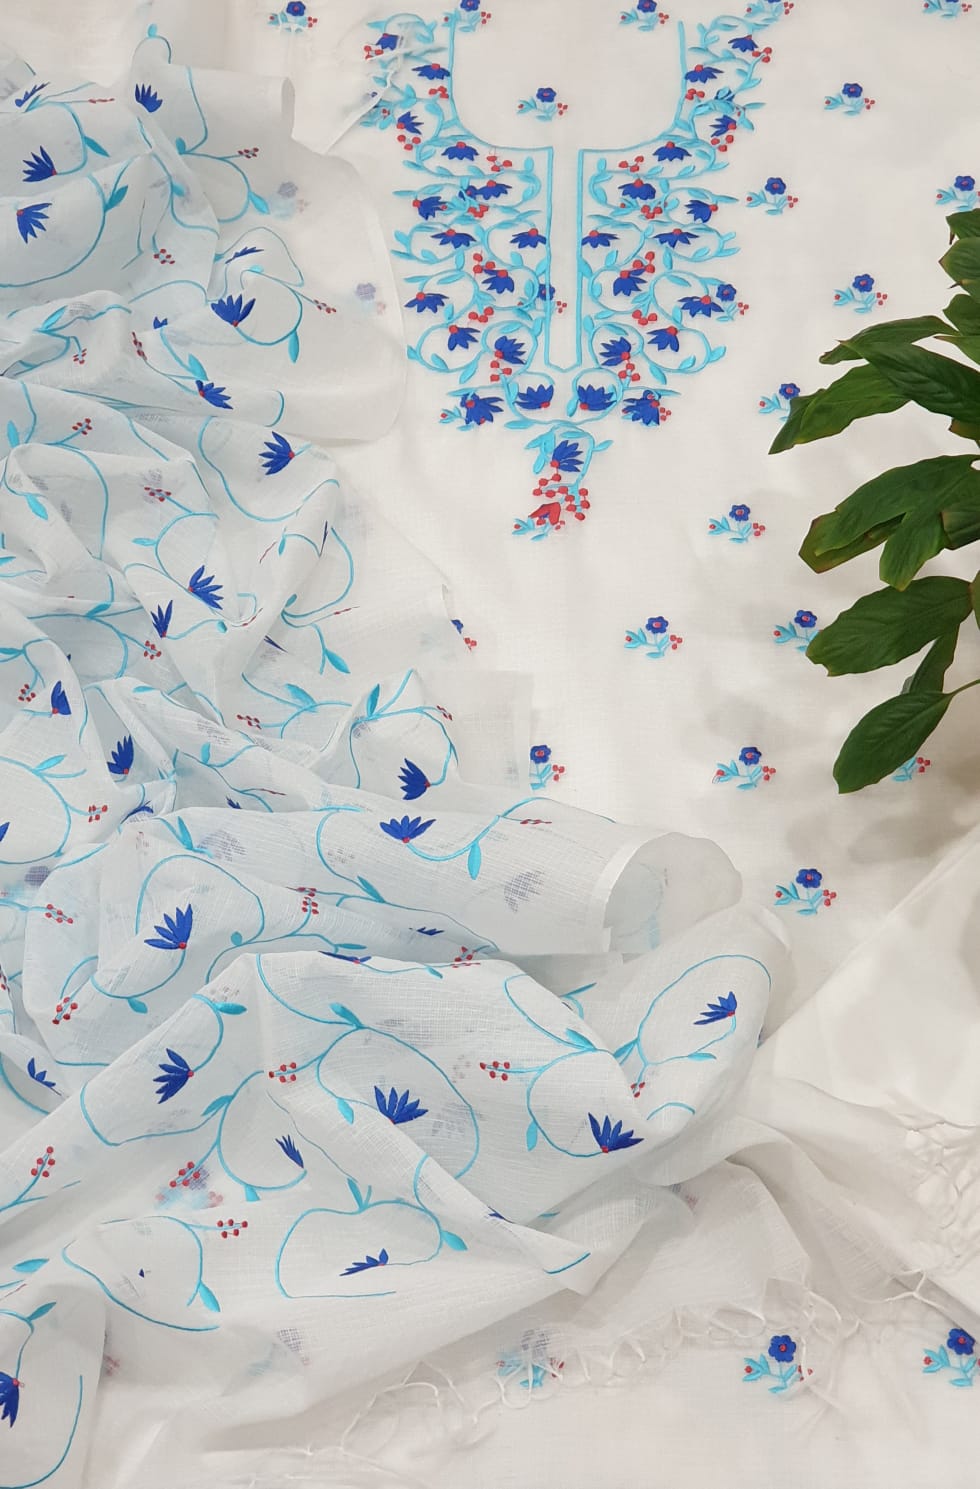 Kota Doriya Embroidery Work Suit In White and blue